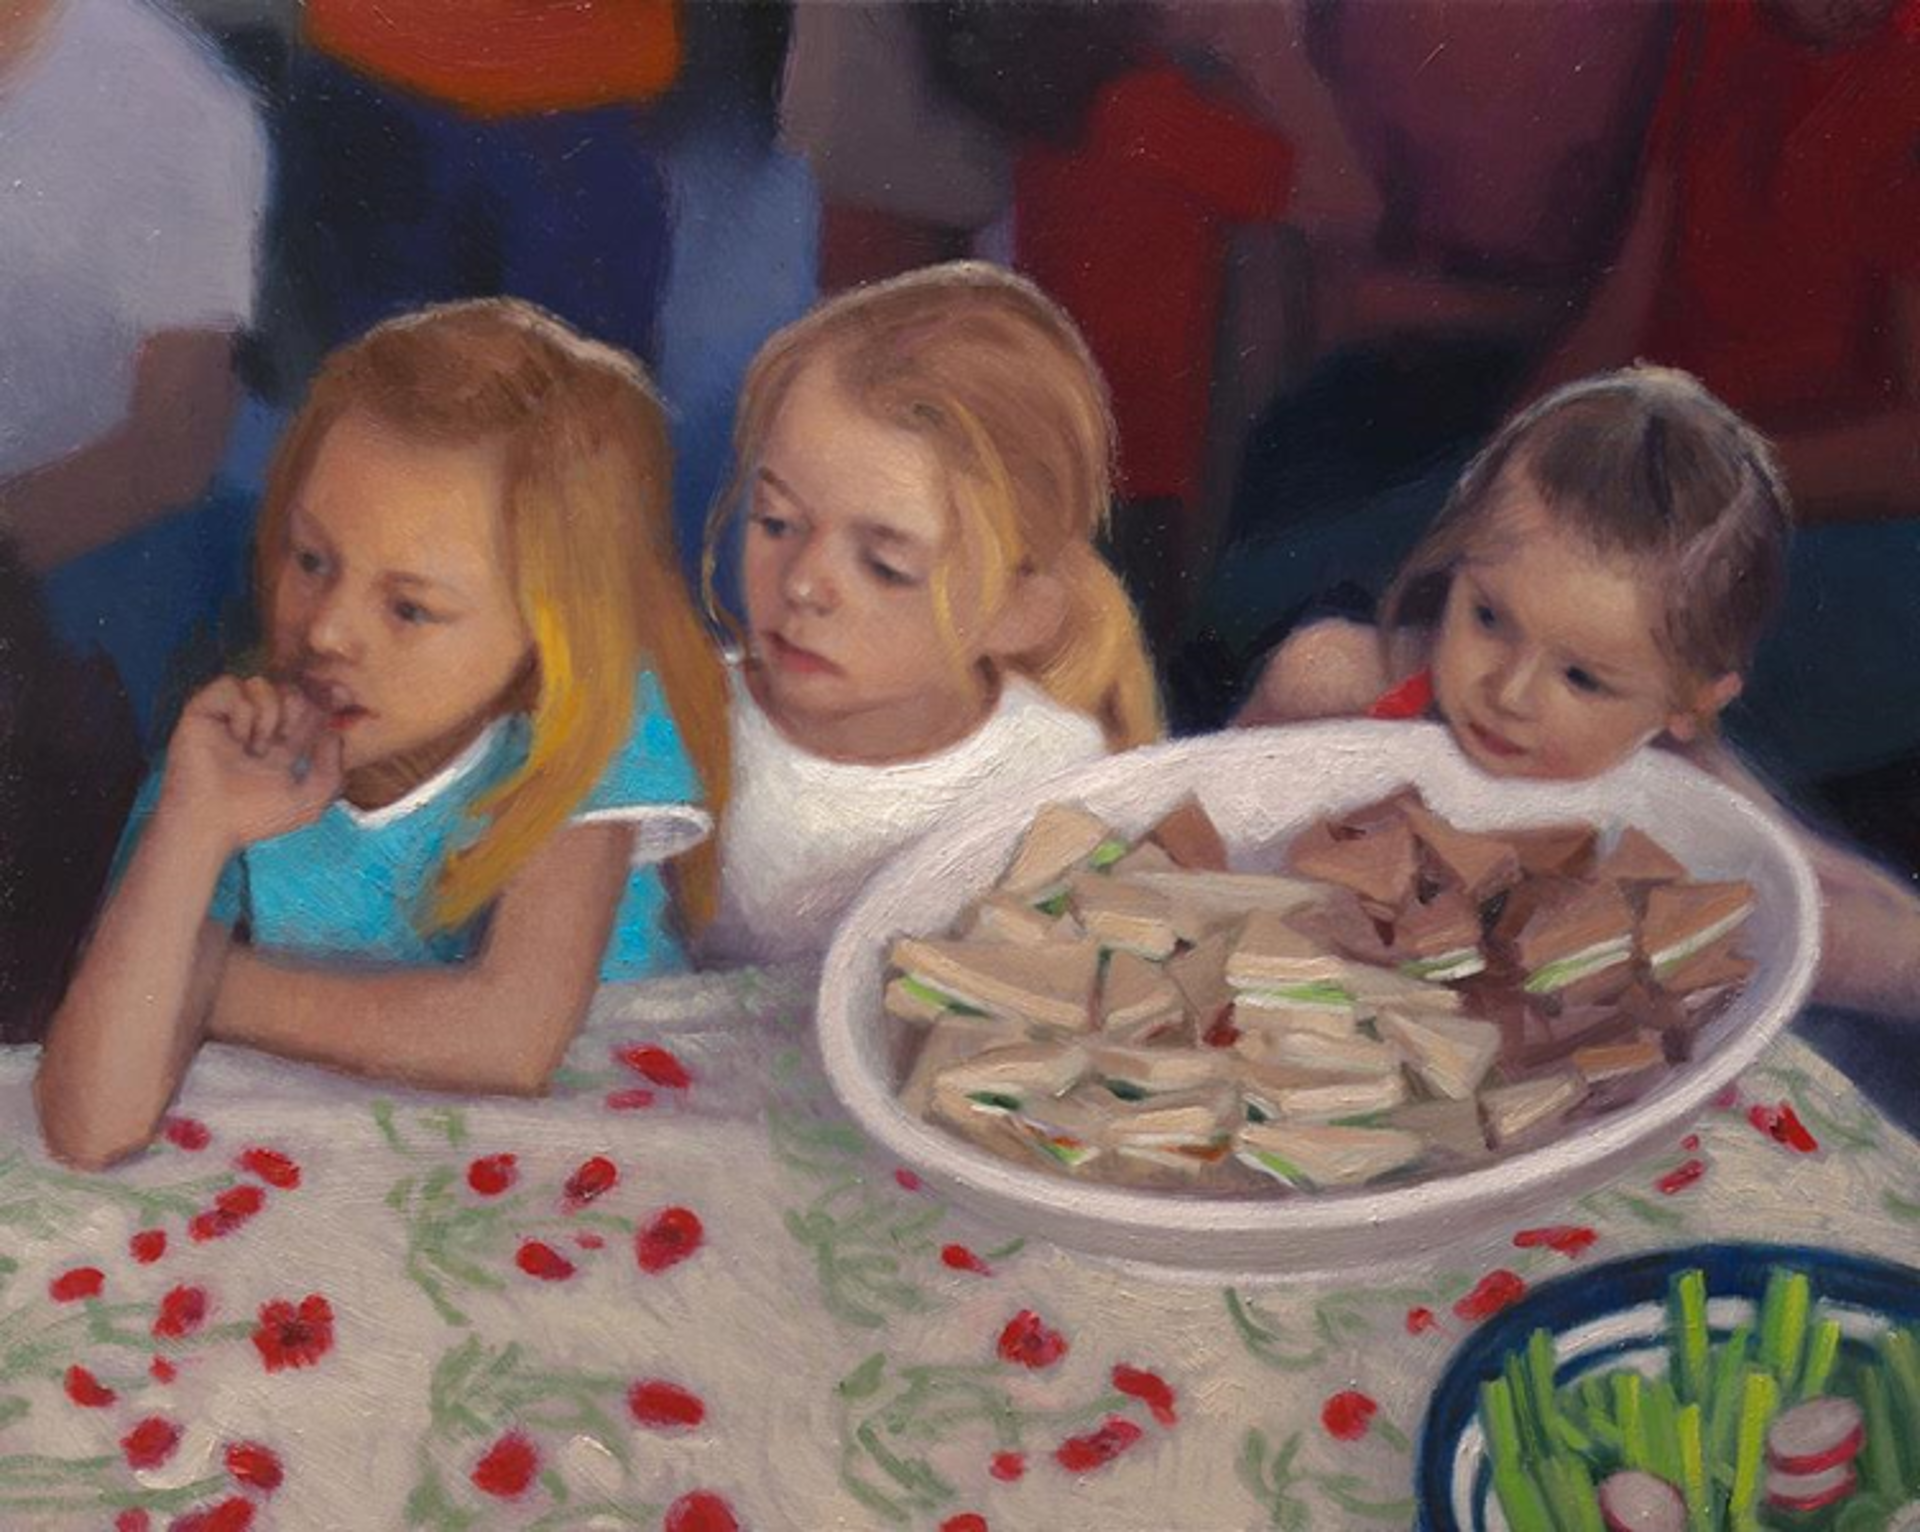 Anticipation of Cake by Ocean Quigley